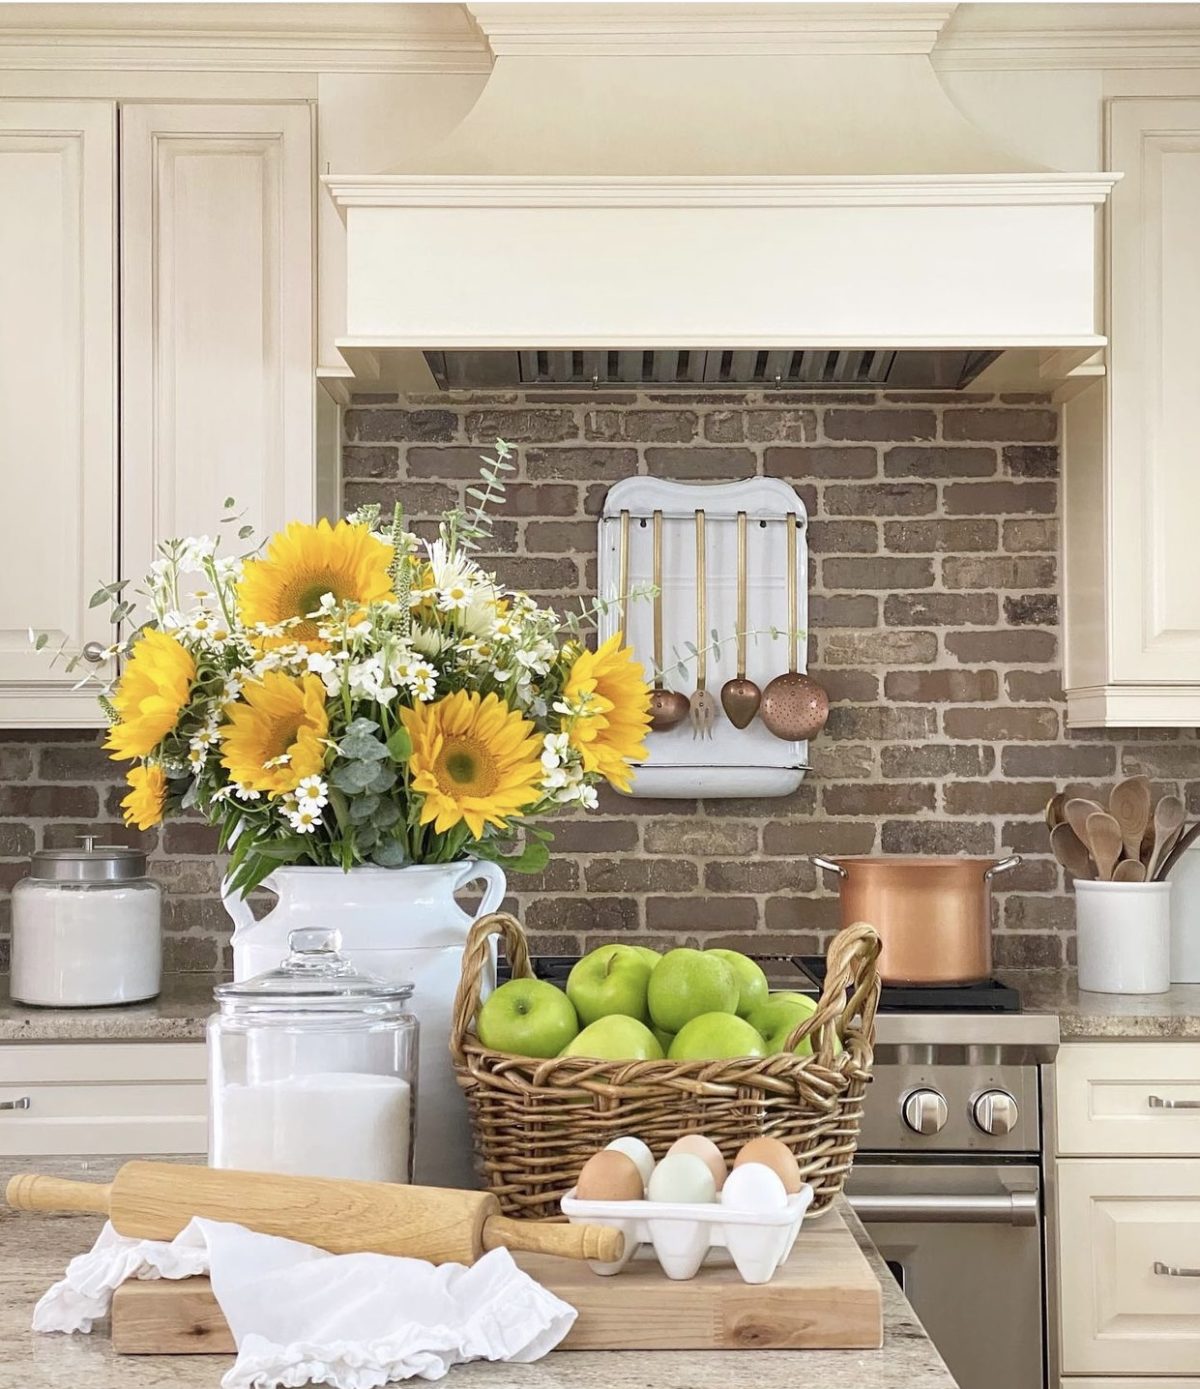 Kitchen view with brick behind the range going up to the vent hood. In the foreground are sunflowers, a basket of apples, fresh eggs, and a rolling pin.